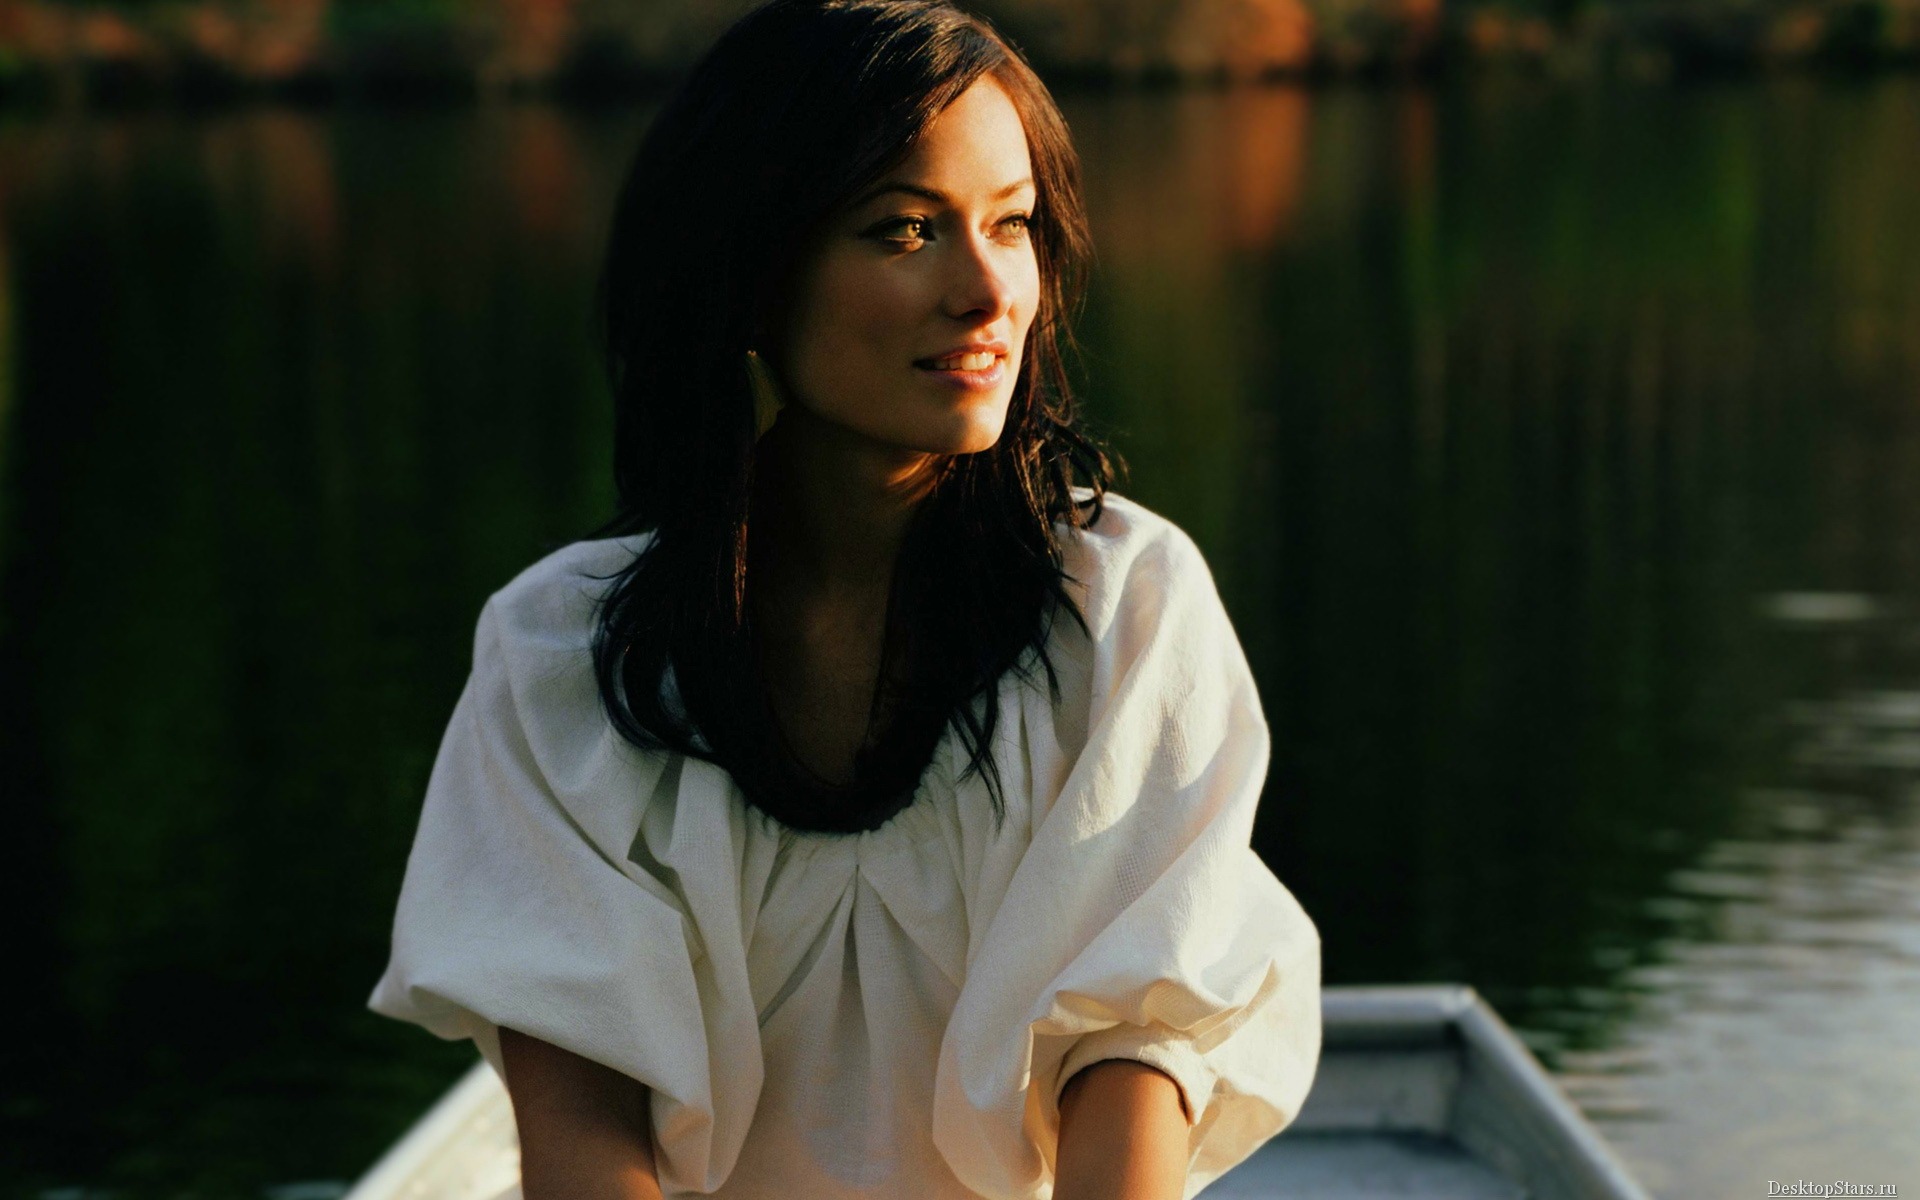 Olivia Wilde #019 - 1920x1200 Wallpapers Pictures Photos Images